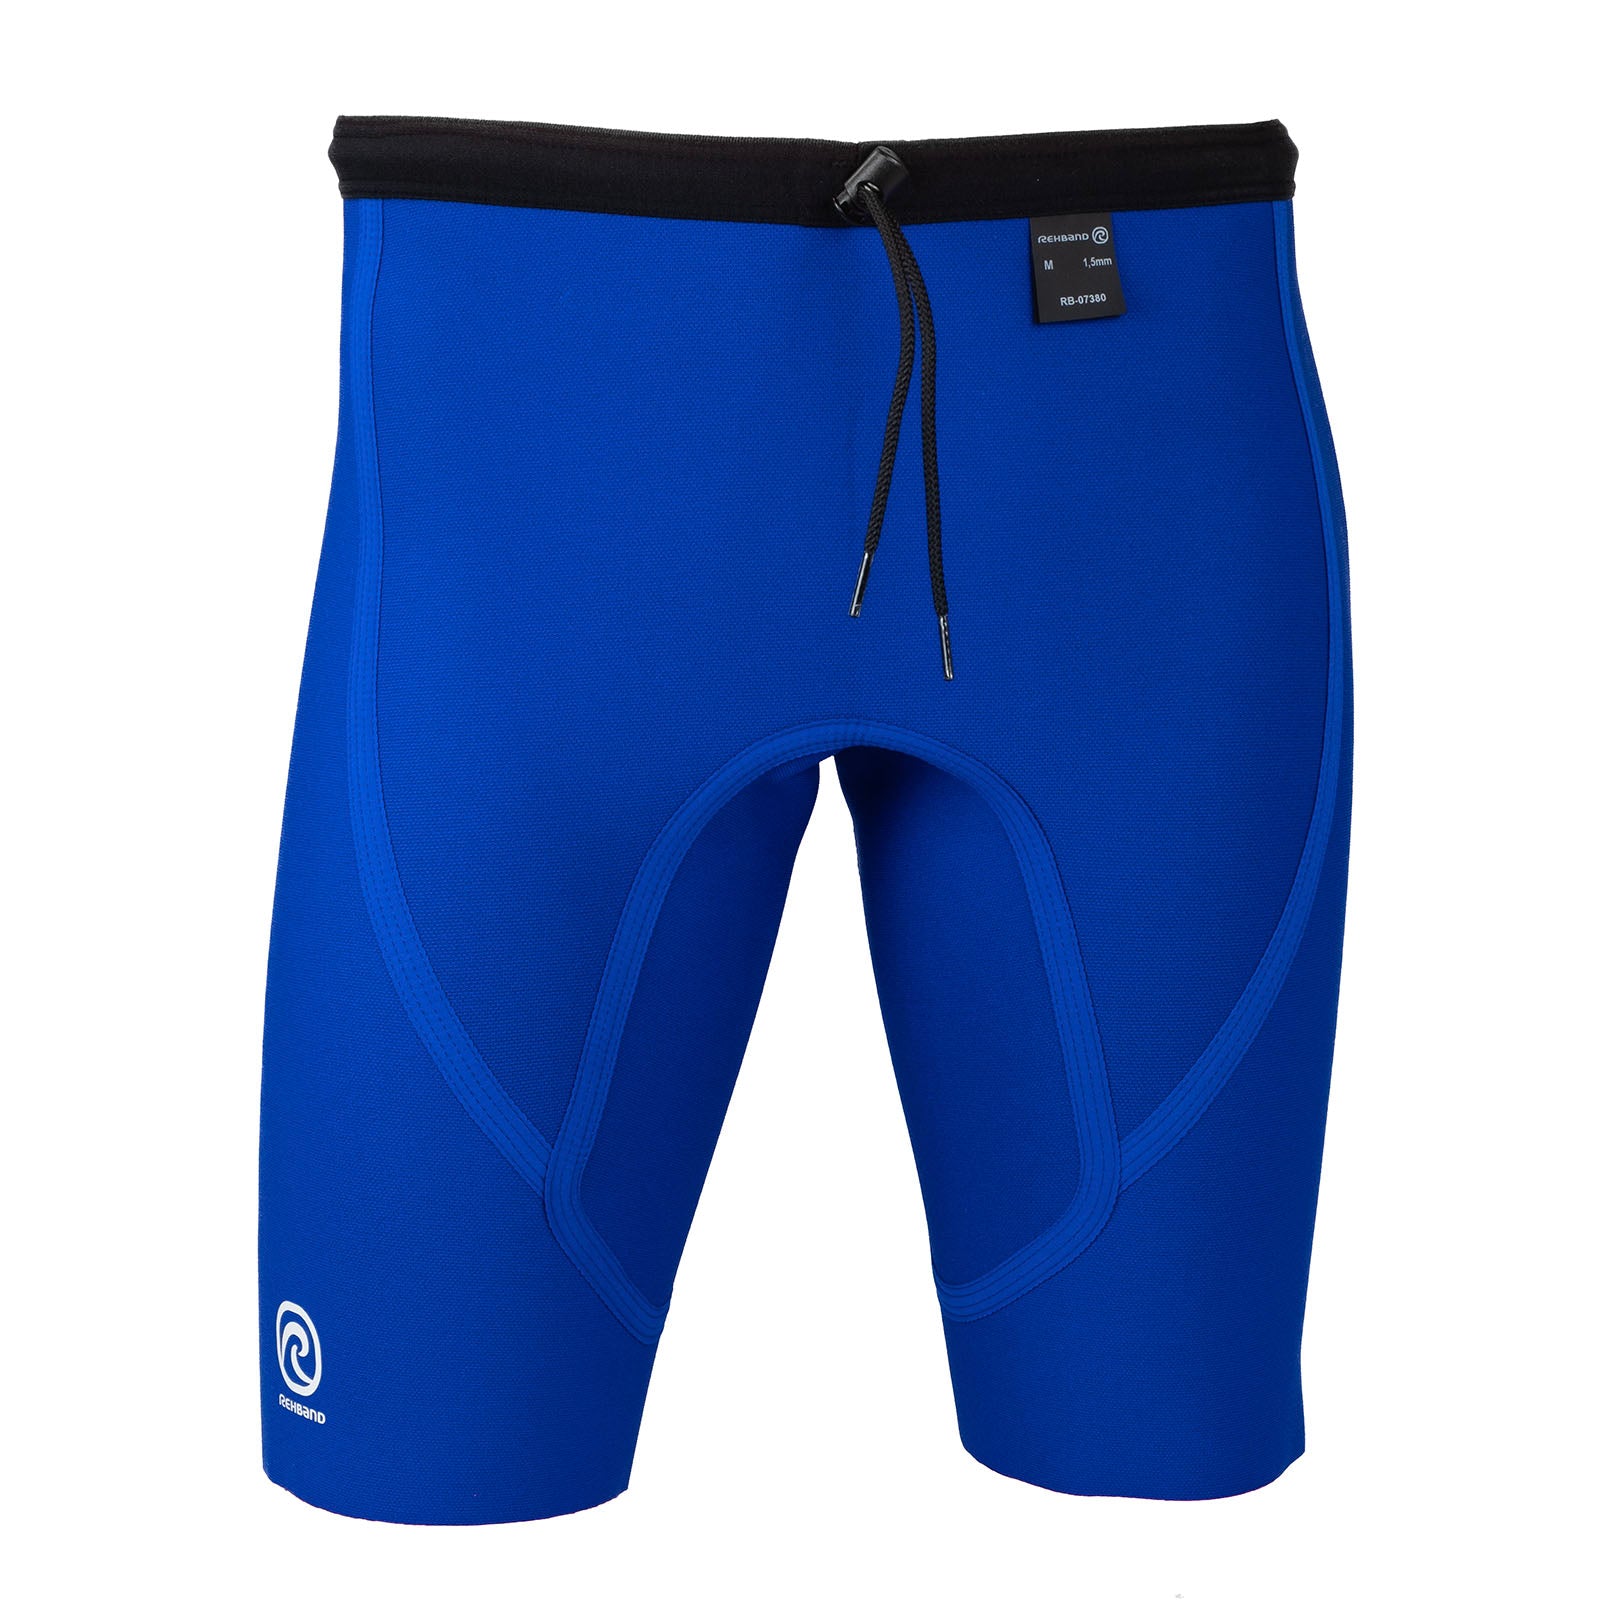 A blue thermal lifing shorts with a white Rehband logo